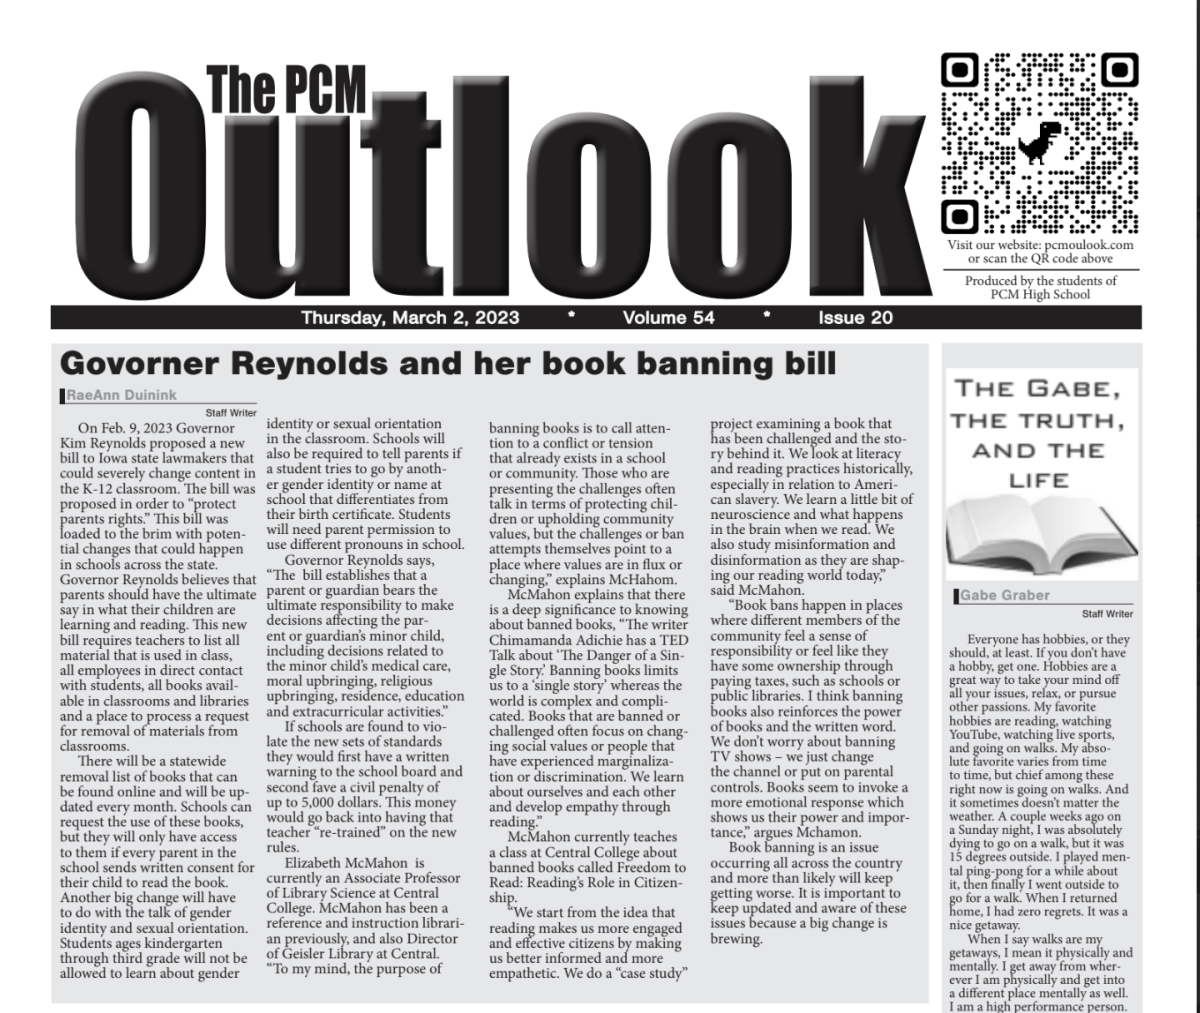 The Outlook - March 3, 2023